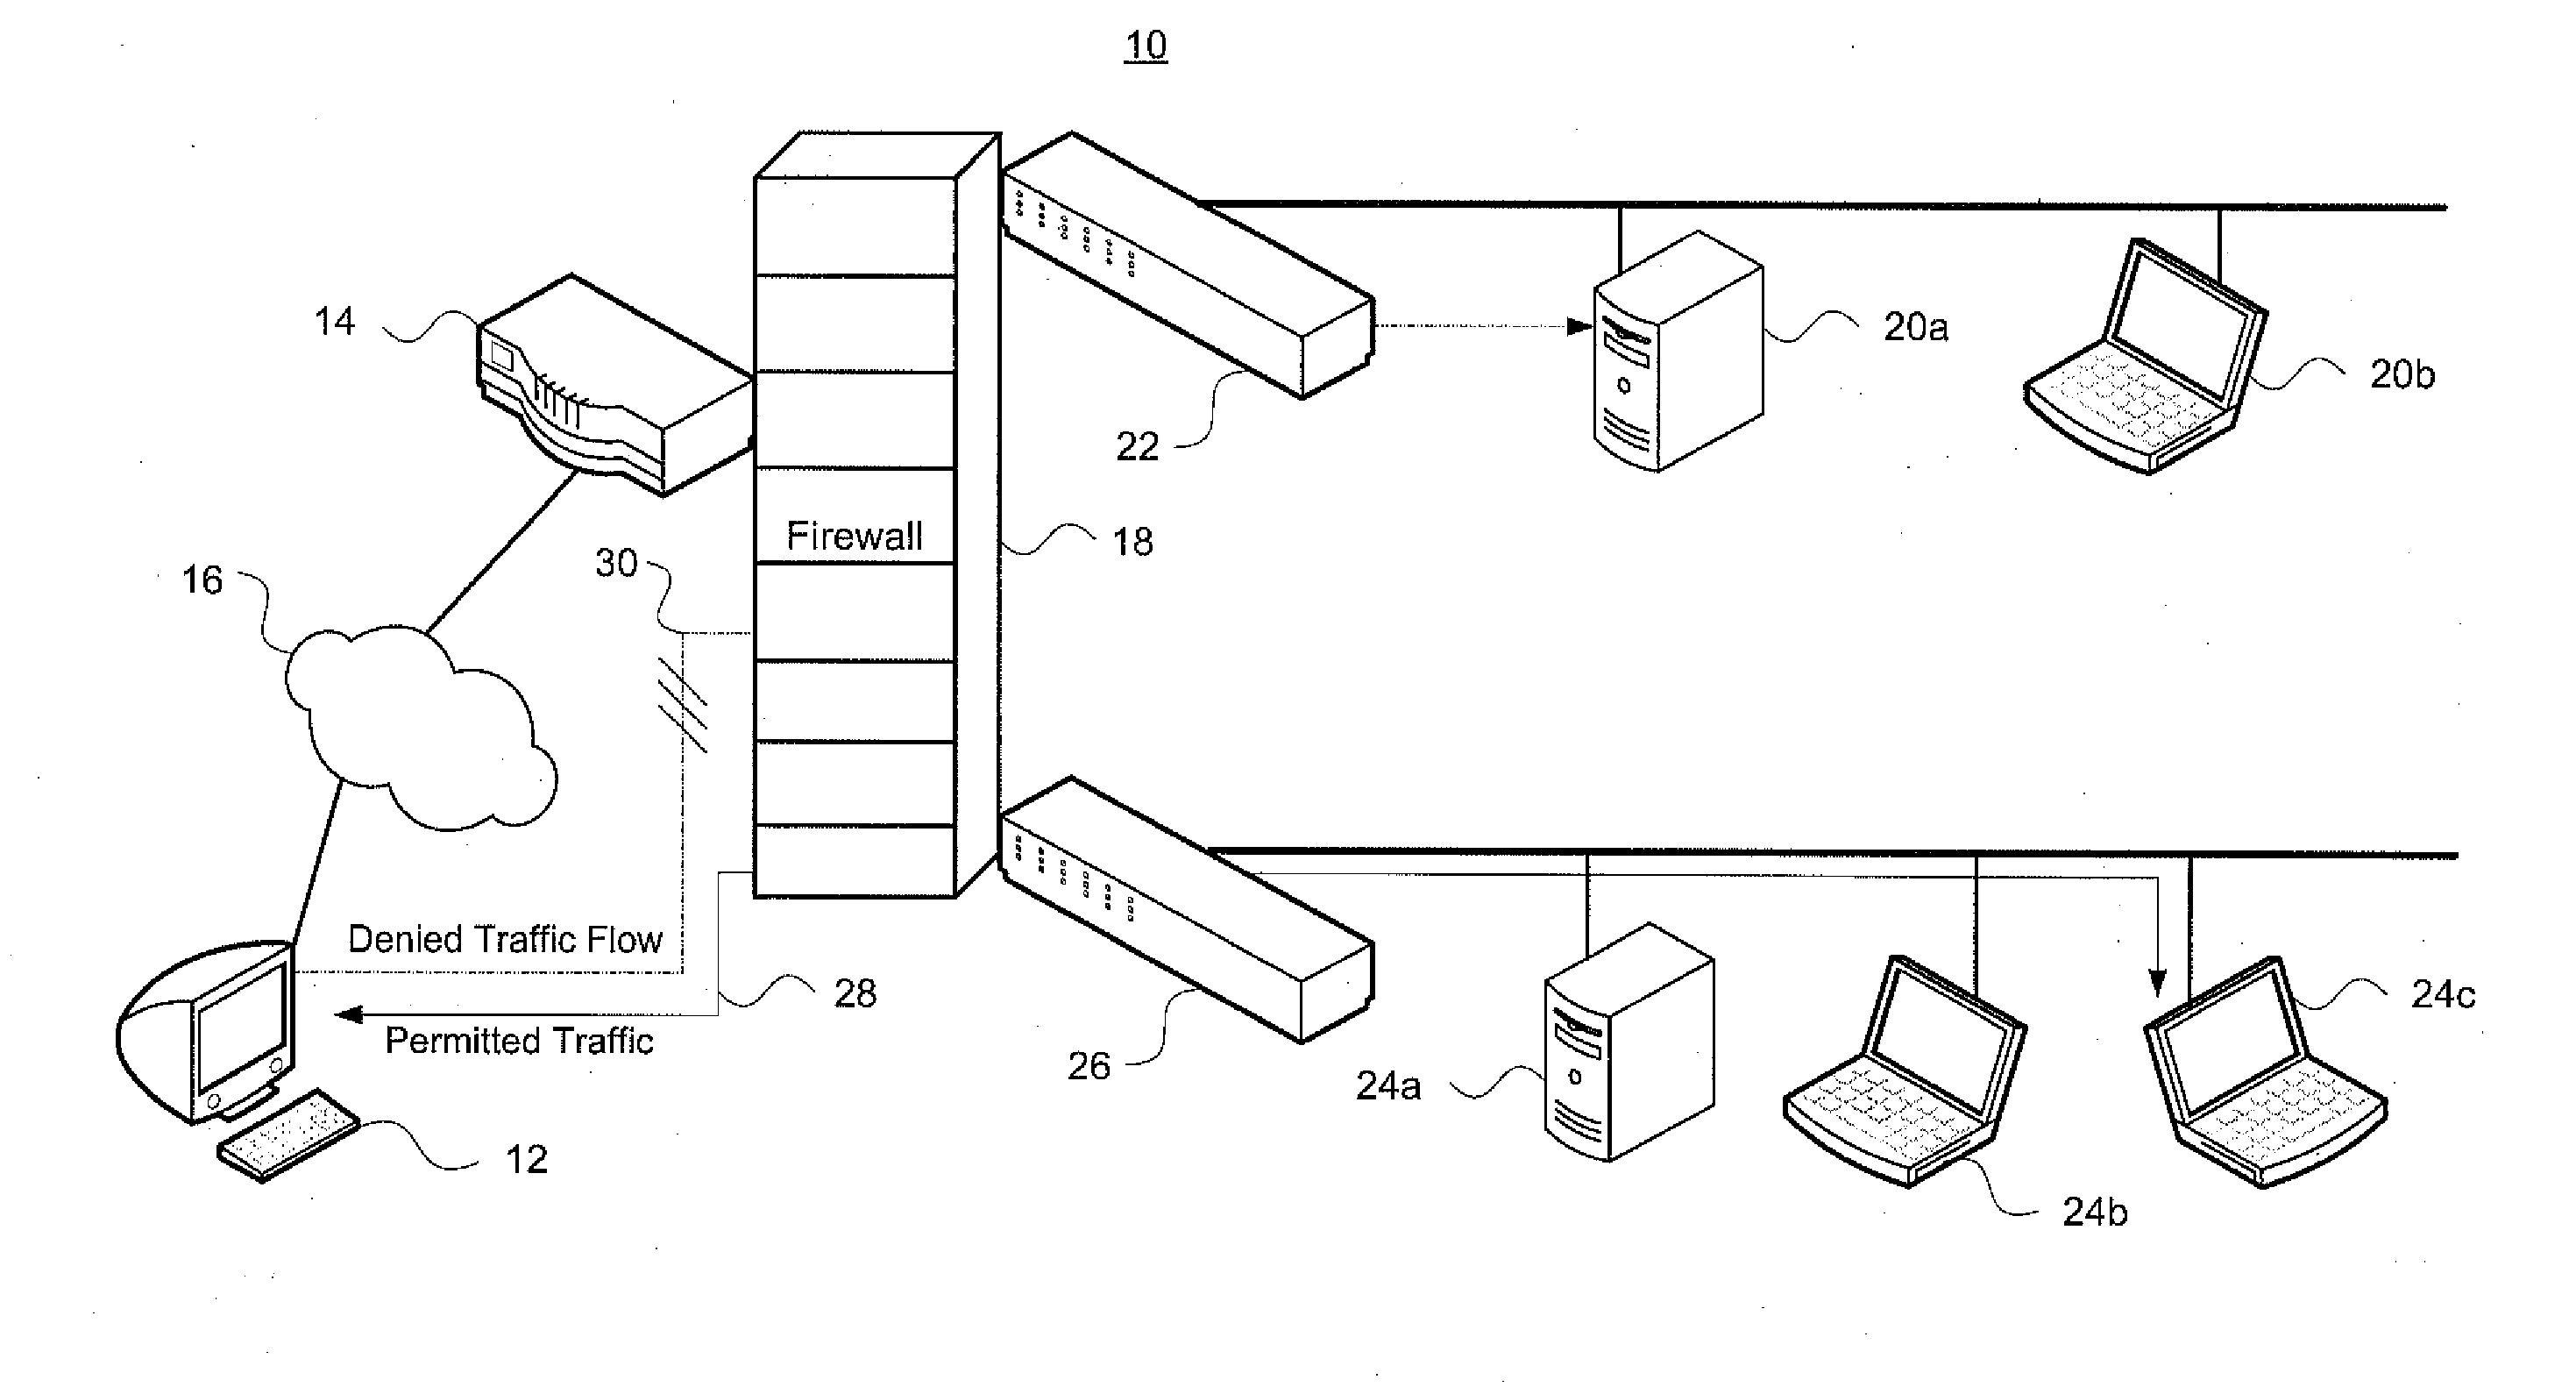 Redundancy detection and resolution and partial order dependency quantification in access control lists